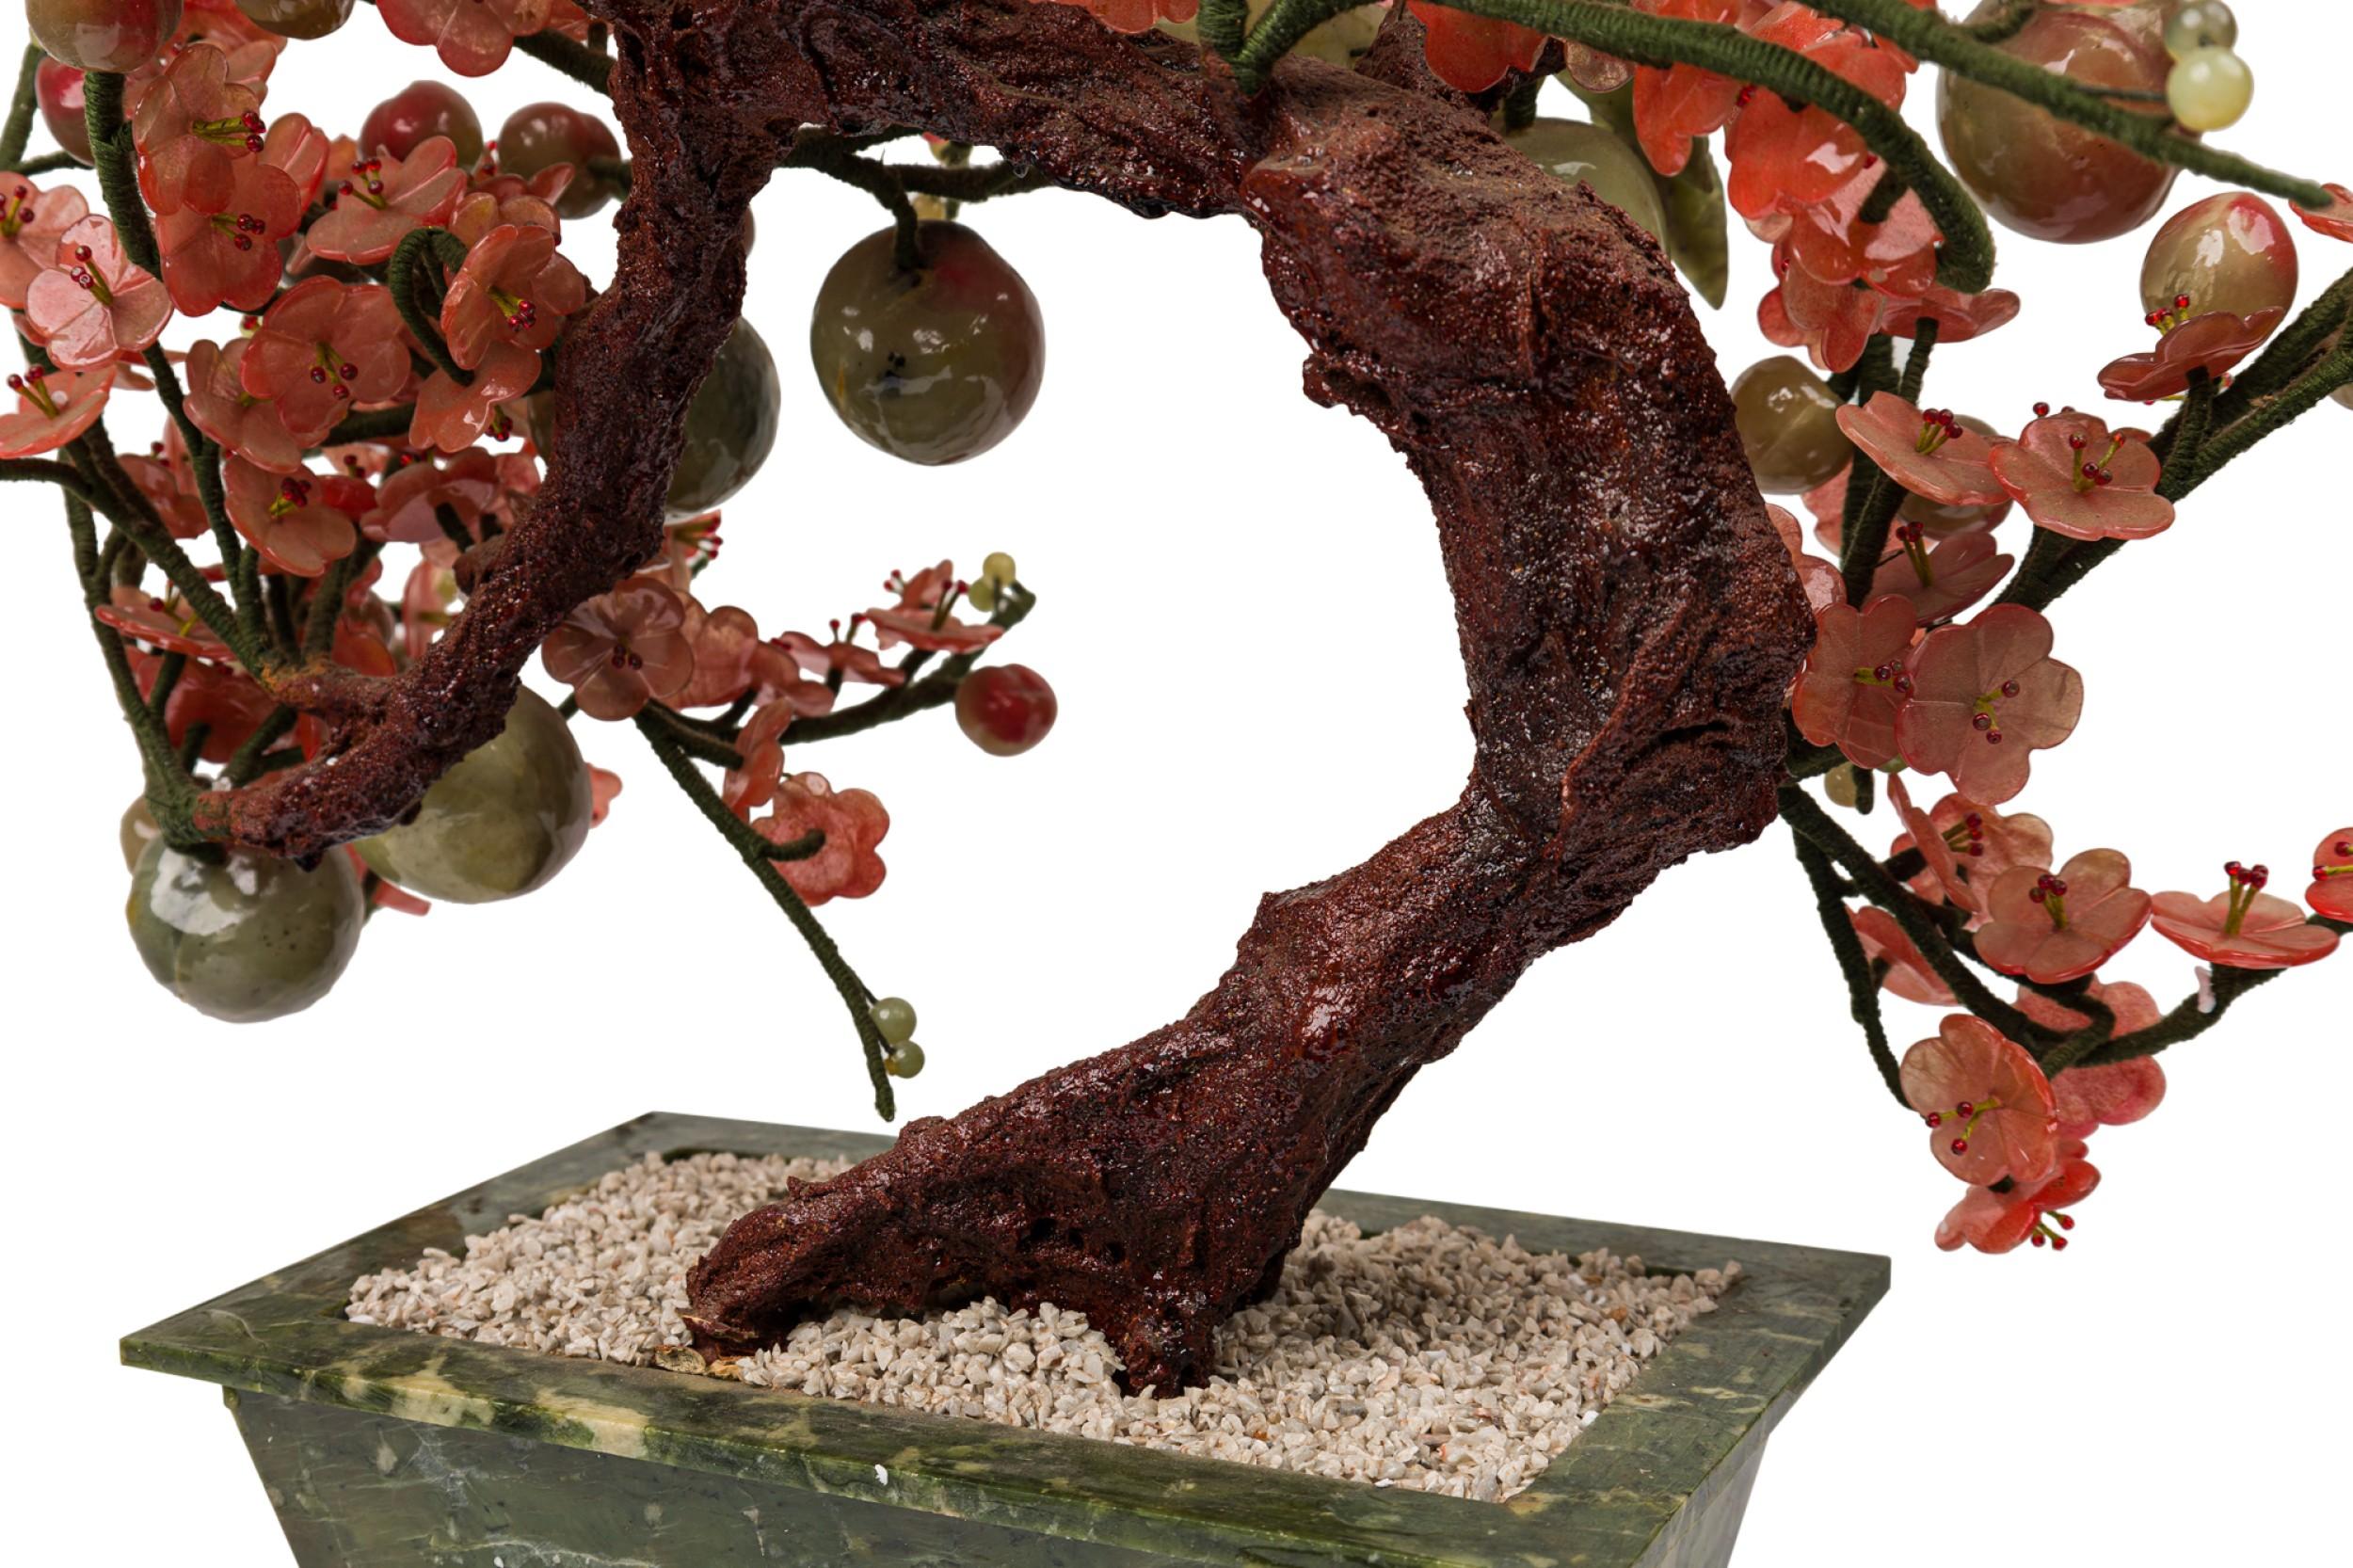 Chinese sculpture features pink glass translucent cherry blossoms and plums hanging from a lacquered tree, sprouted from a bed of faux white stones within a mottled green rectangular glass planter resembling jade.
